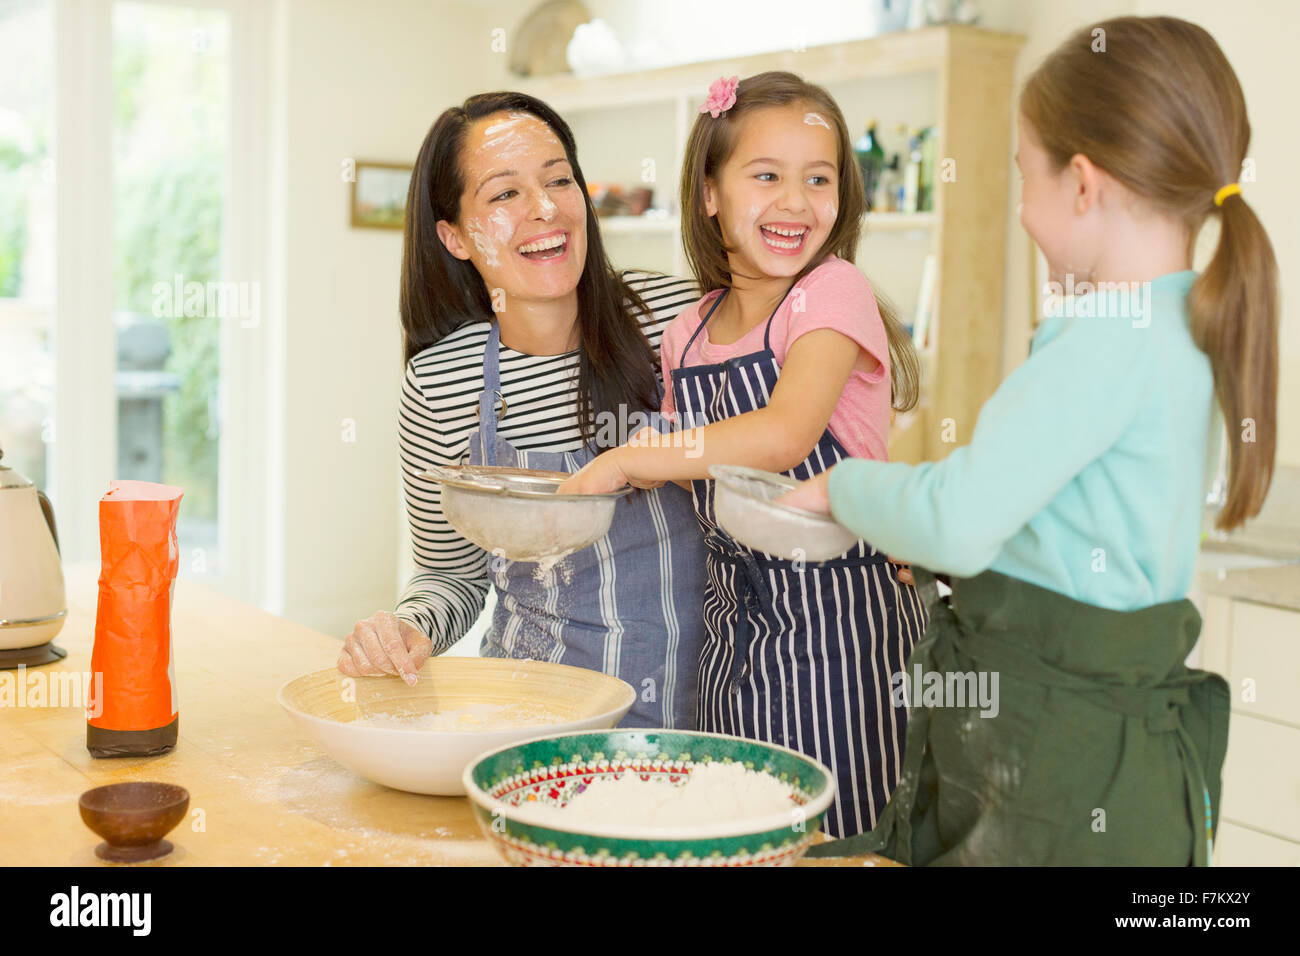 Laughing mother and daughters baking with flour on faces in kitchen Stock Photo